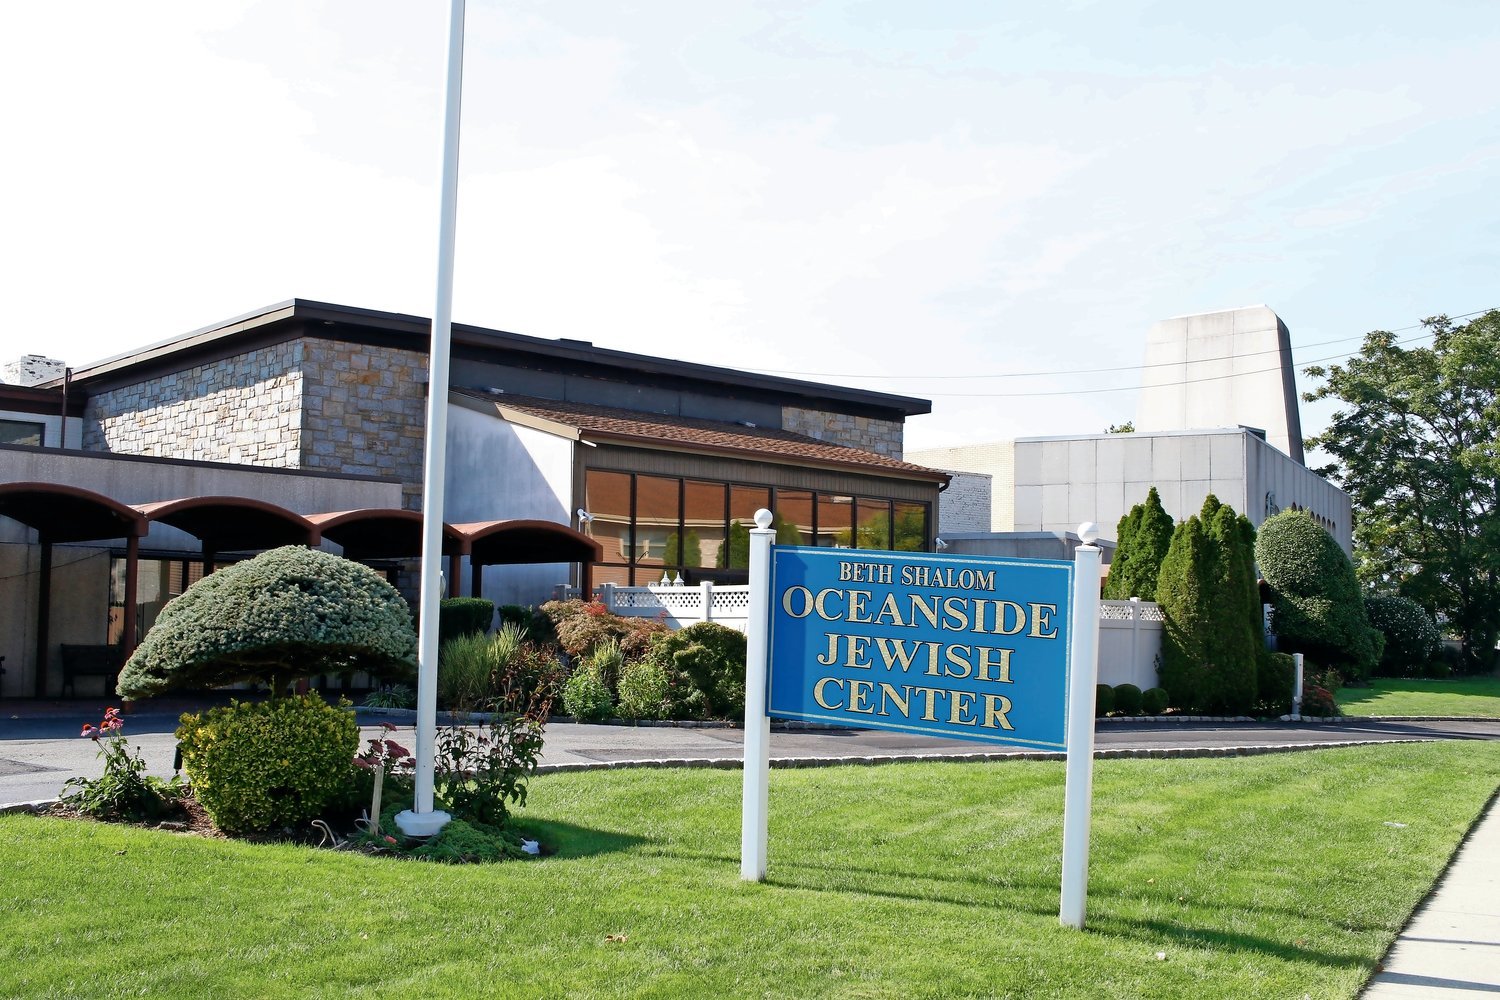 A developer’s plan to convert part of the Oceanside Jewish Center property into a 119-room assisted-living facility was voted down by the Hempstead Town Board, 7-0, on March 9.